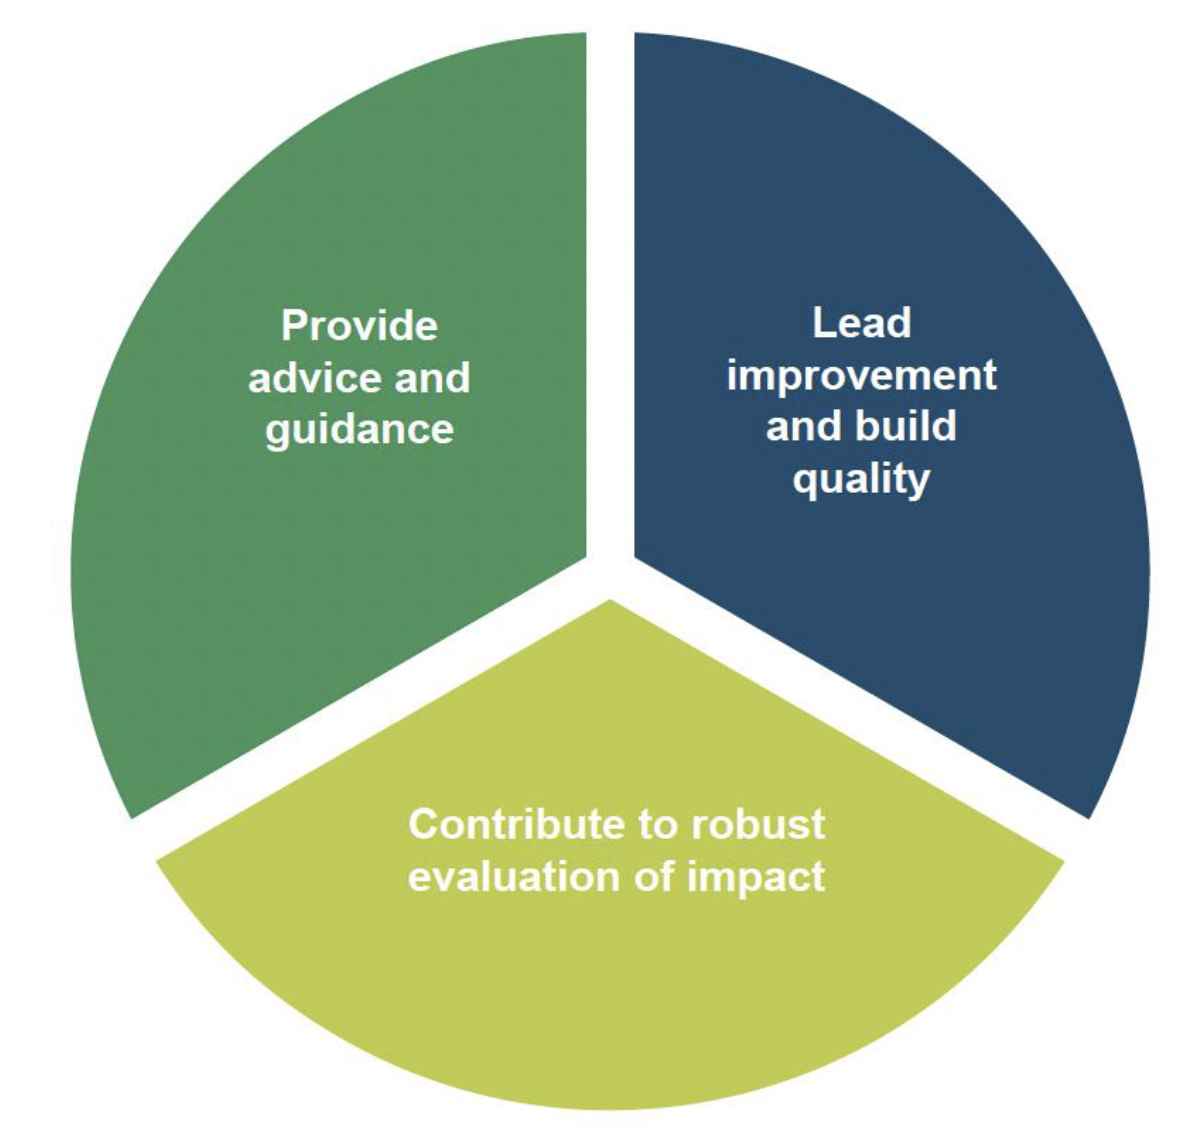 Displays the 3 key functions of the Attainment Advisor role in a pie chart. There are 3 equal segments stating provide advice and guidance; lead improvement and build quality; and contribute to robust evaluation of impact.